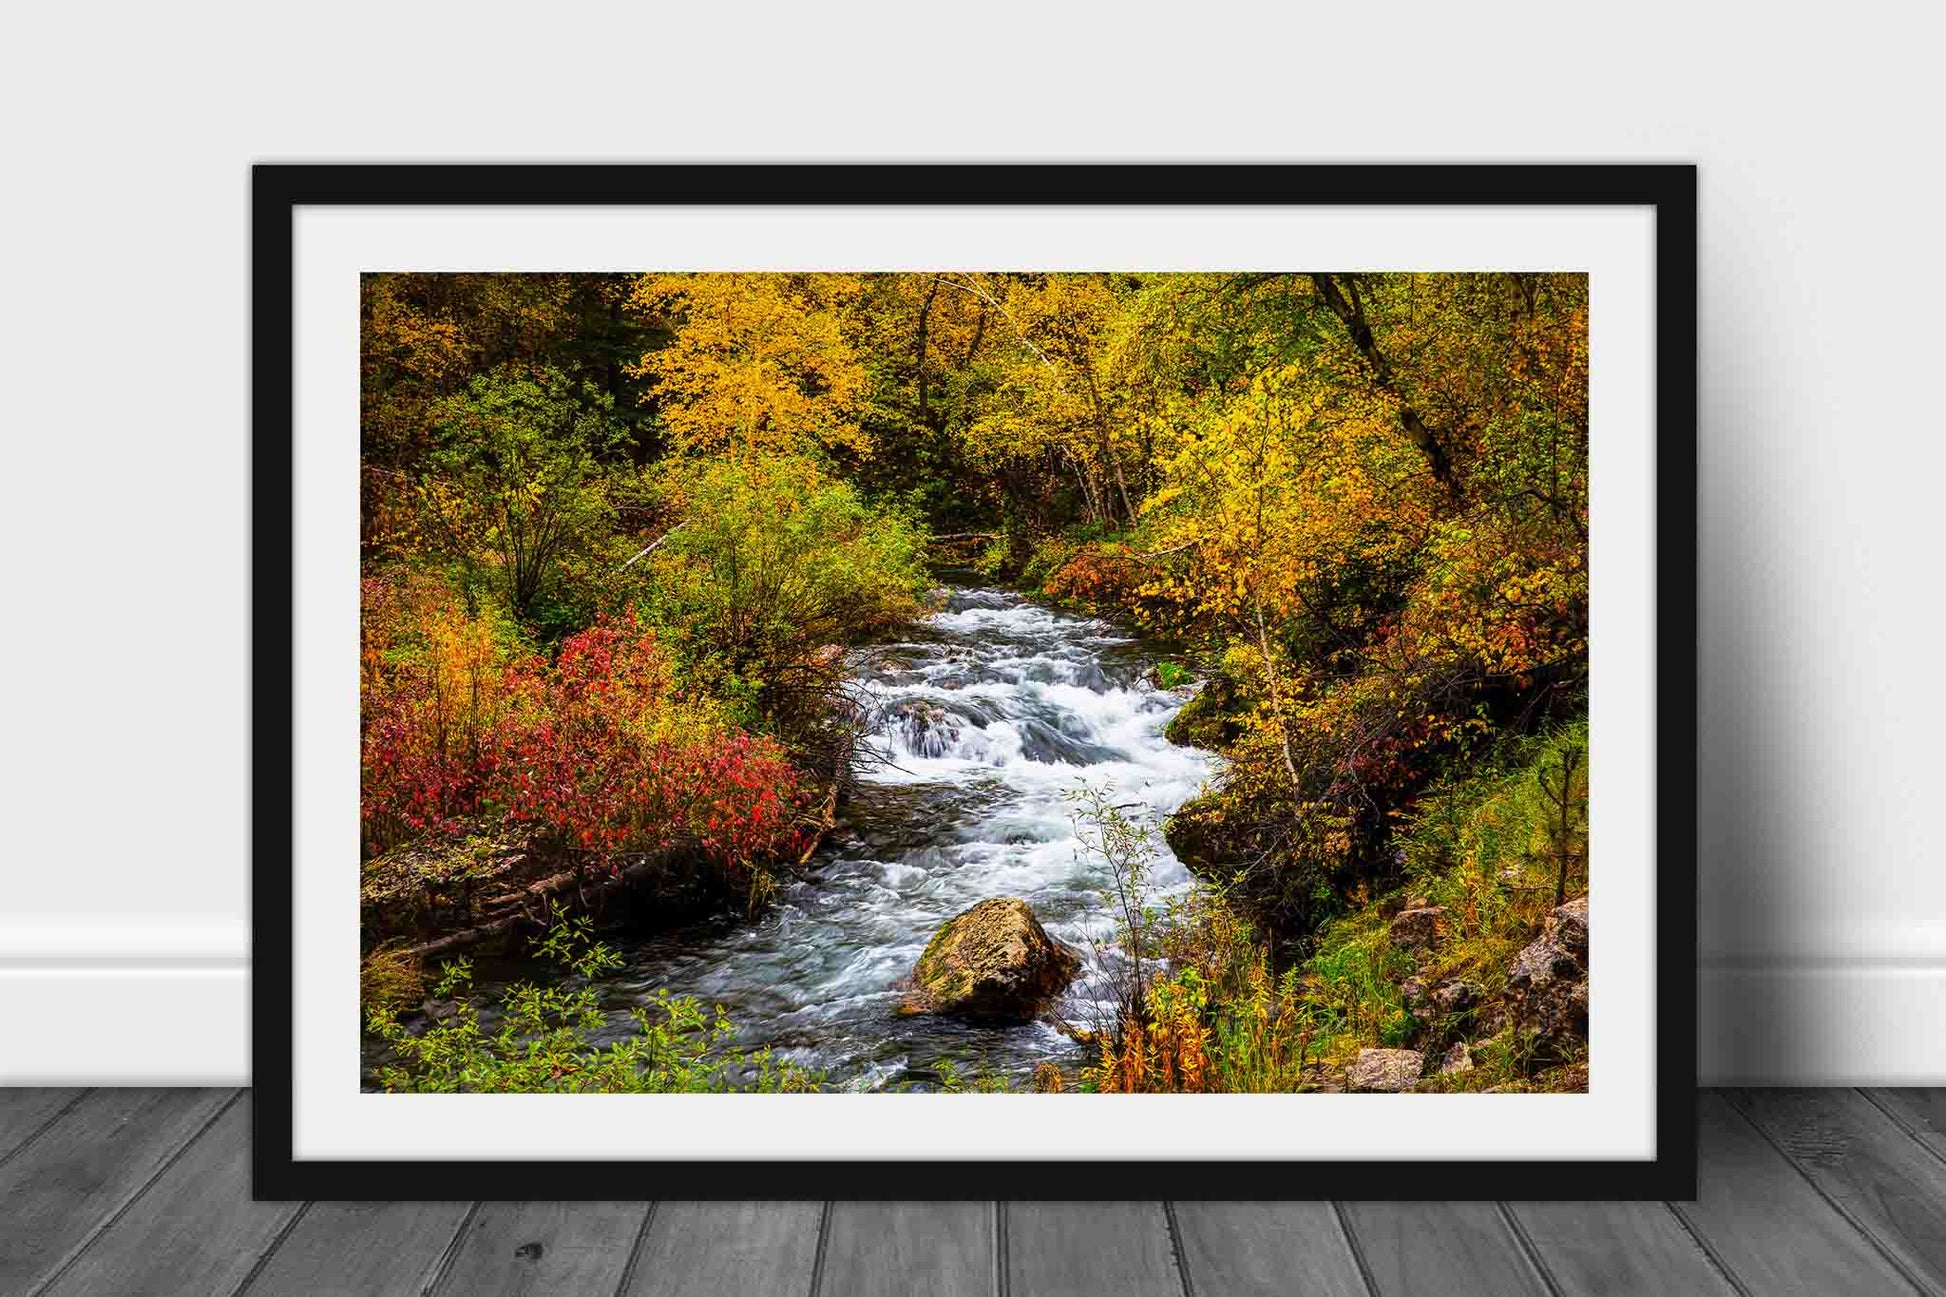 Framed Black Hills print of Spearfish Creek flowing through fall foliage on autumn day in Spearfish Canyon, South Dakota by Sean Ramsey of Southern Plains Photography.